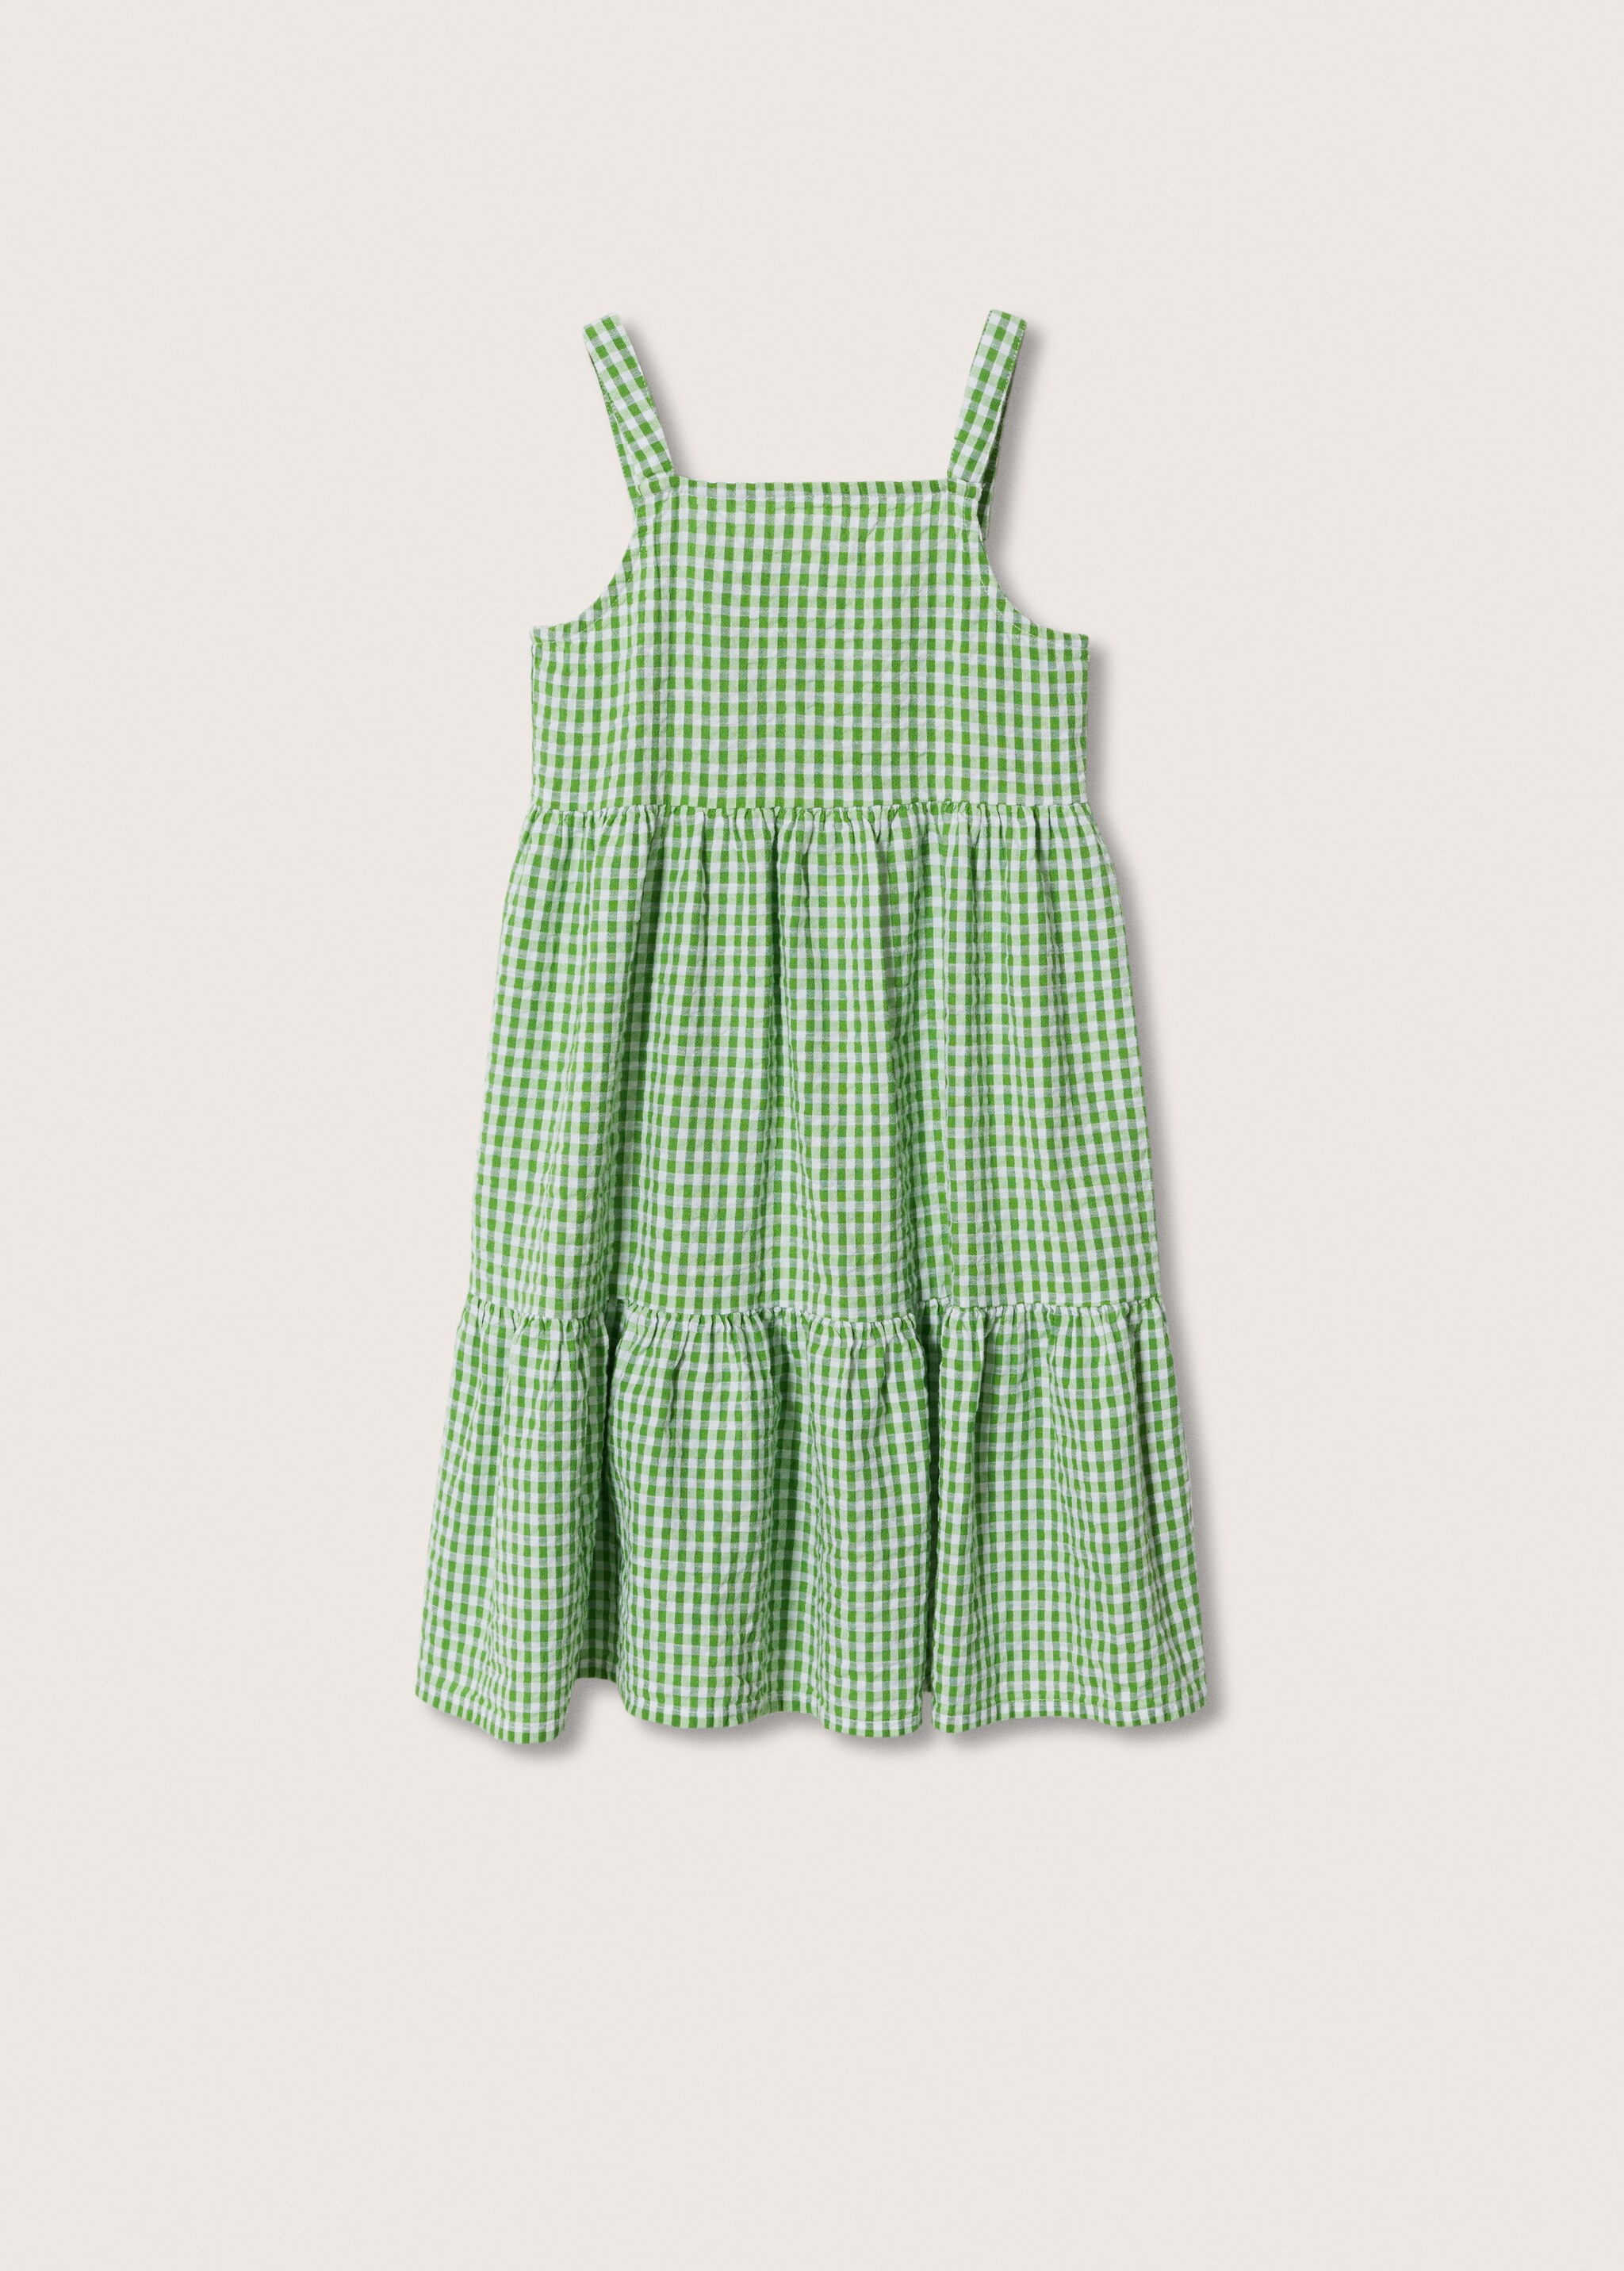 Gingham check dress - Article without model